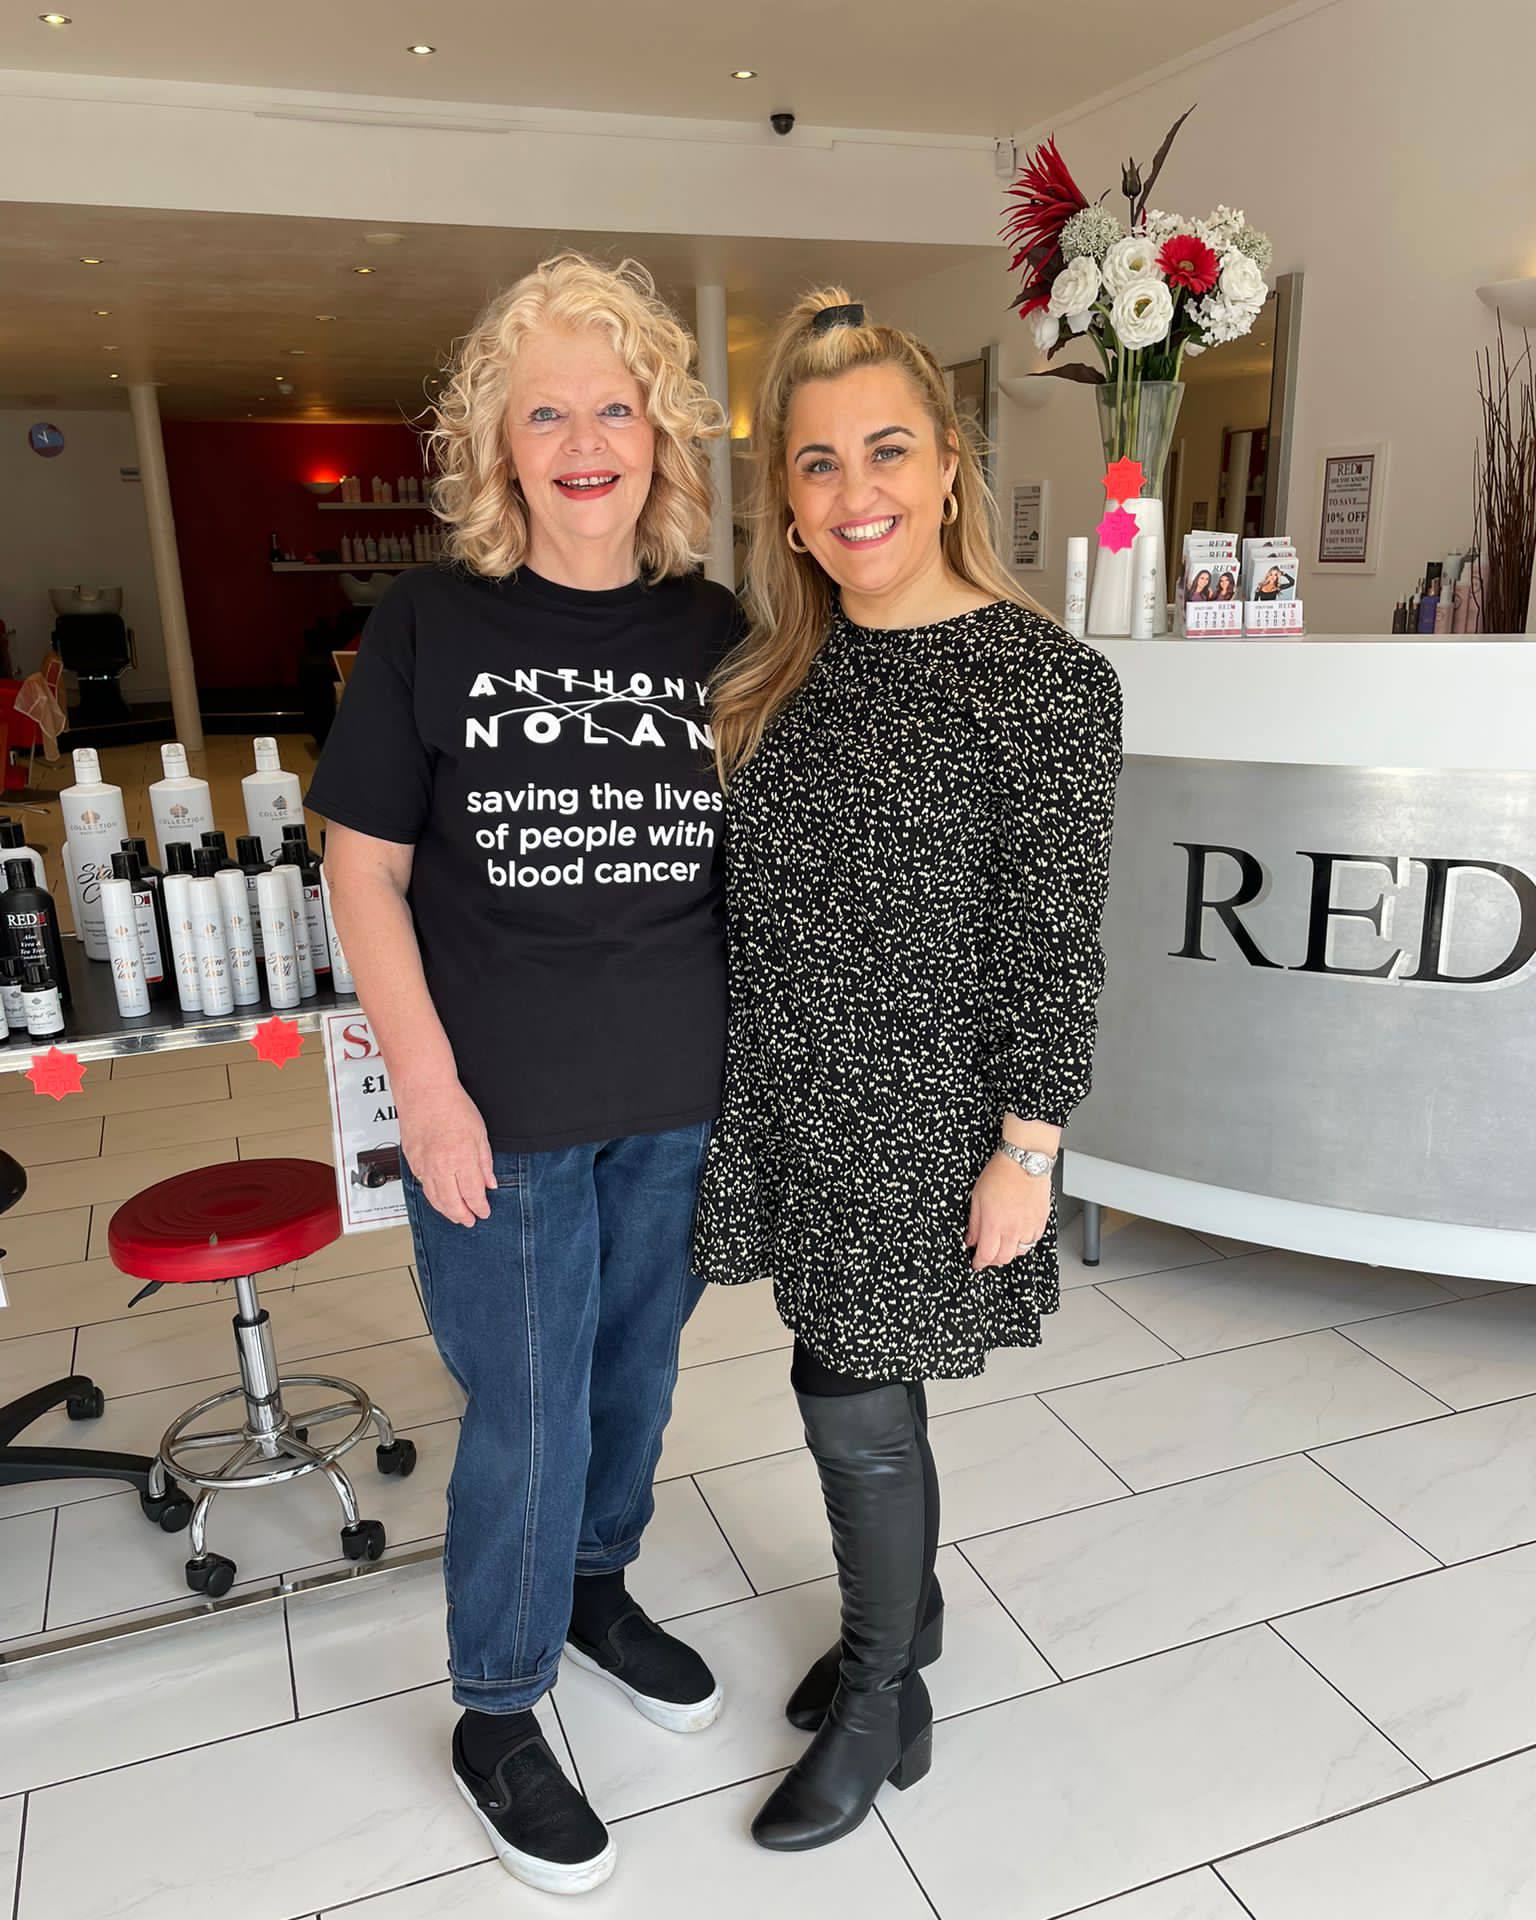 walk 2km in May challenge At Red Hair Salons in Battle, Hastings & Rye